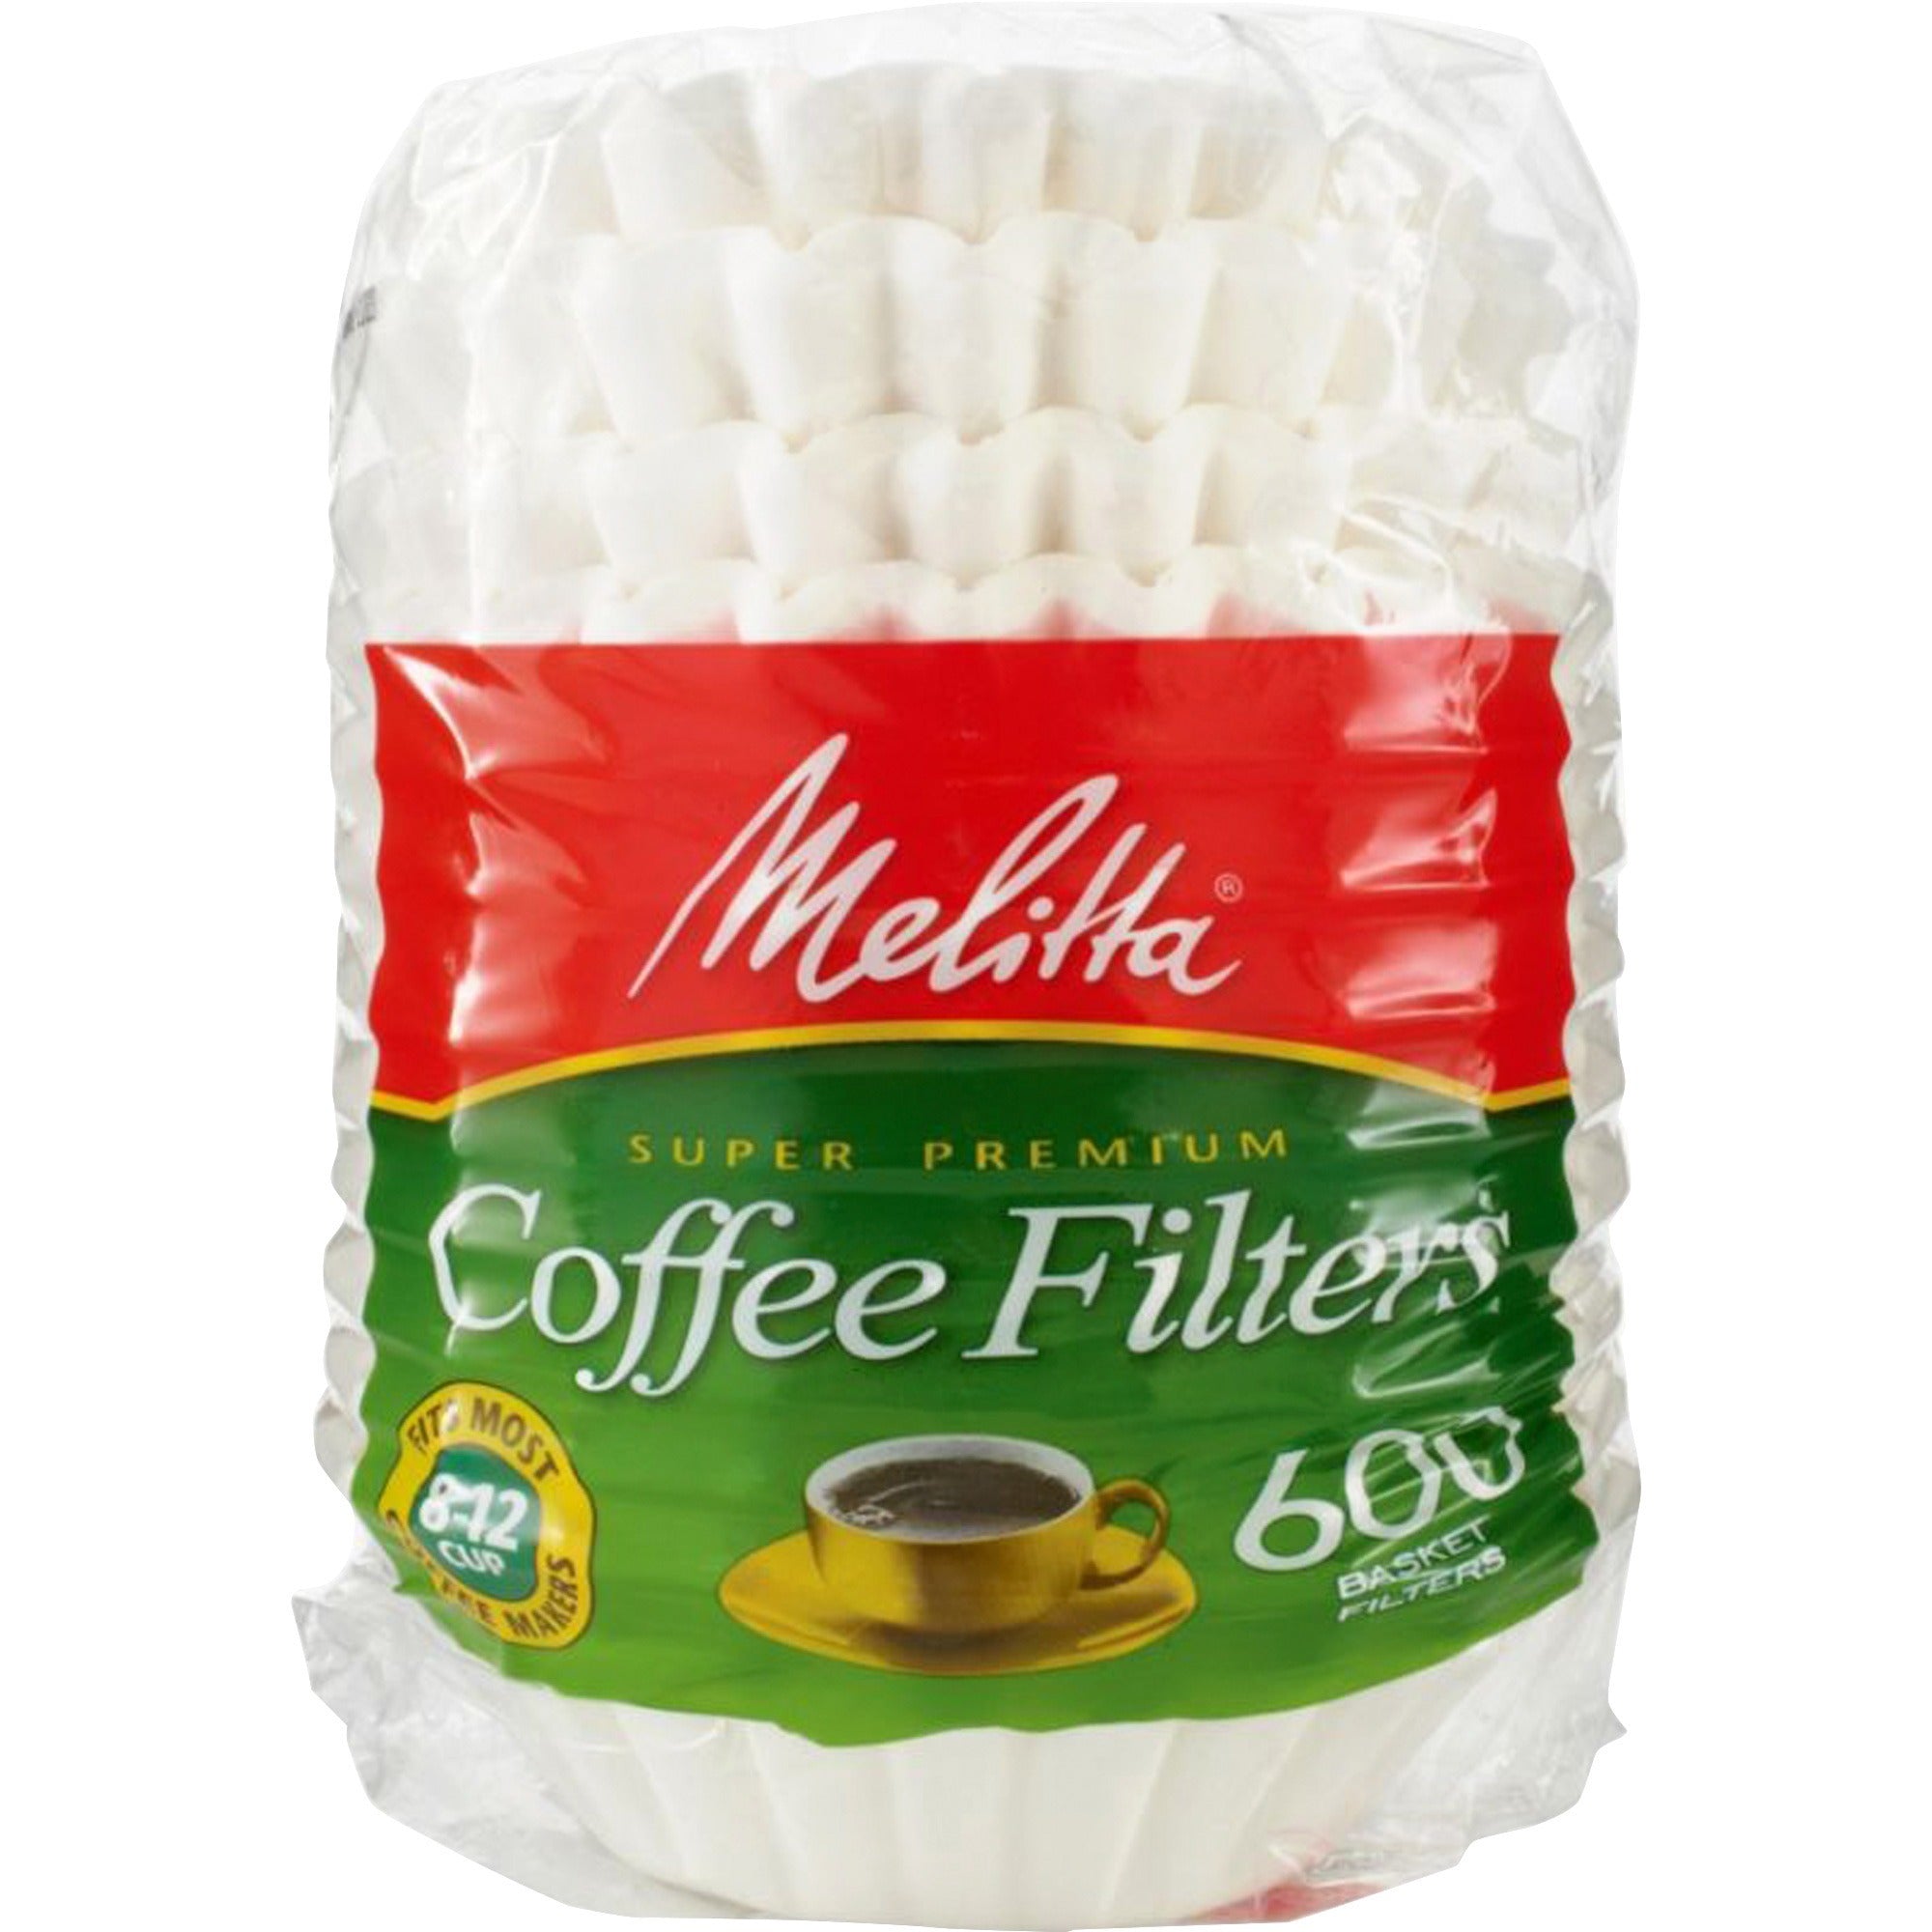 Melitta Super Premium Basket-style Coffee Filter - Heavyweight, Tear Resistant, Disposable - 600 / Pack - White - 